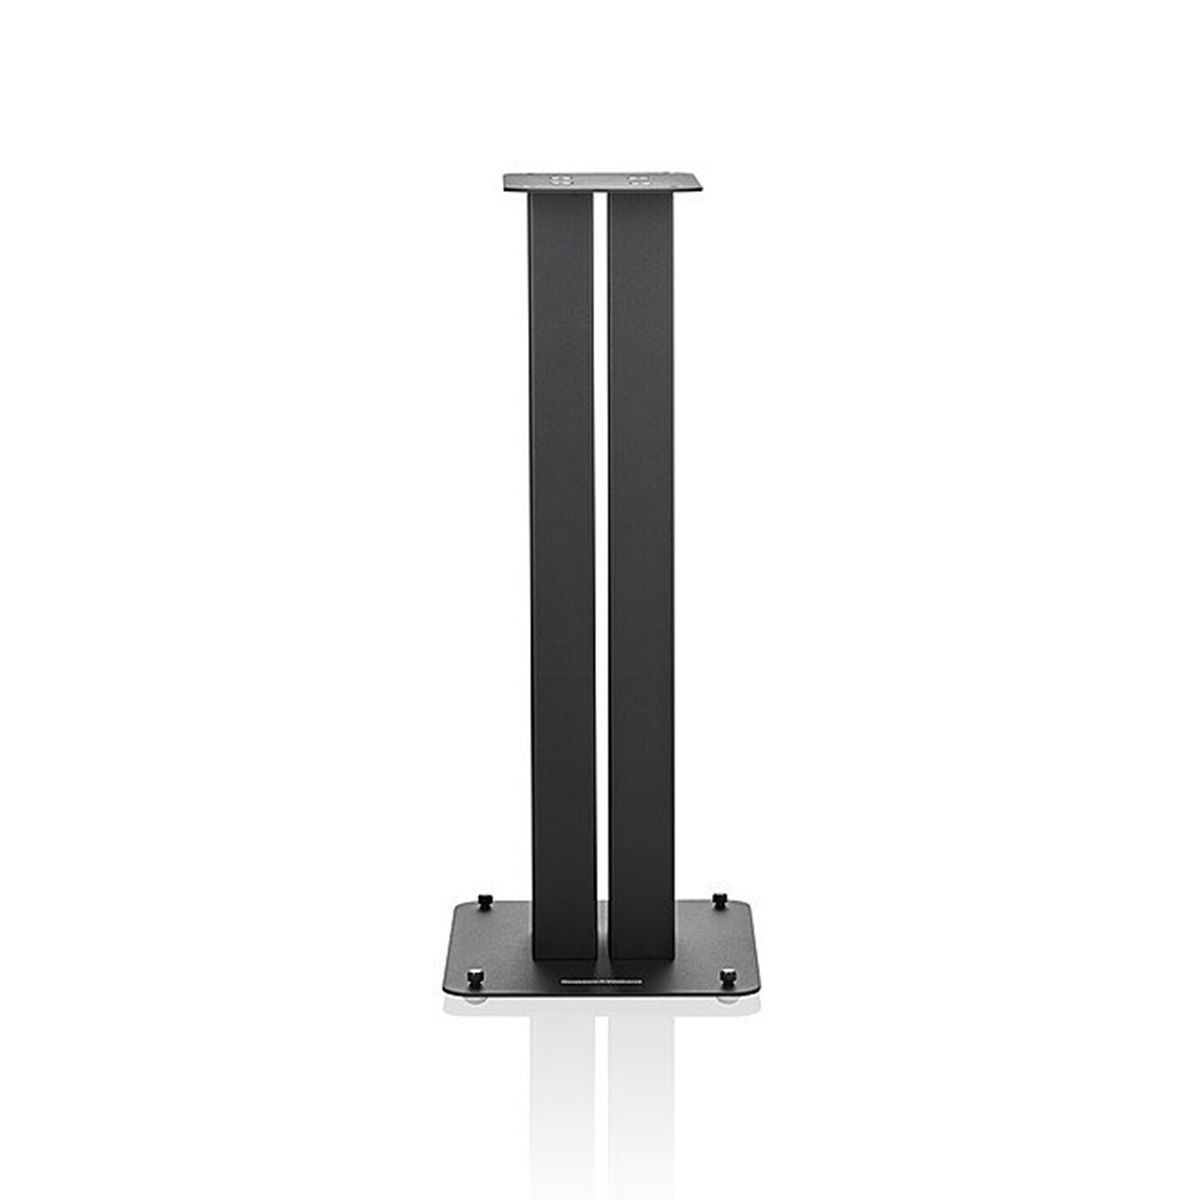 Bowers & Wilkins FS-600 S3 Speaker Stands - single black - front view